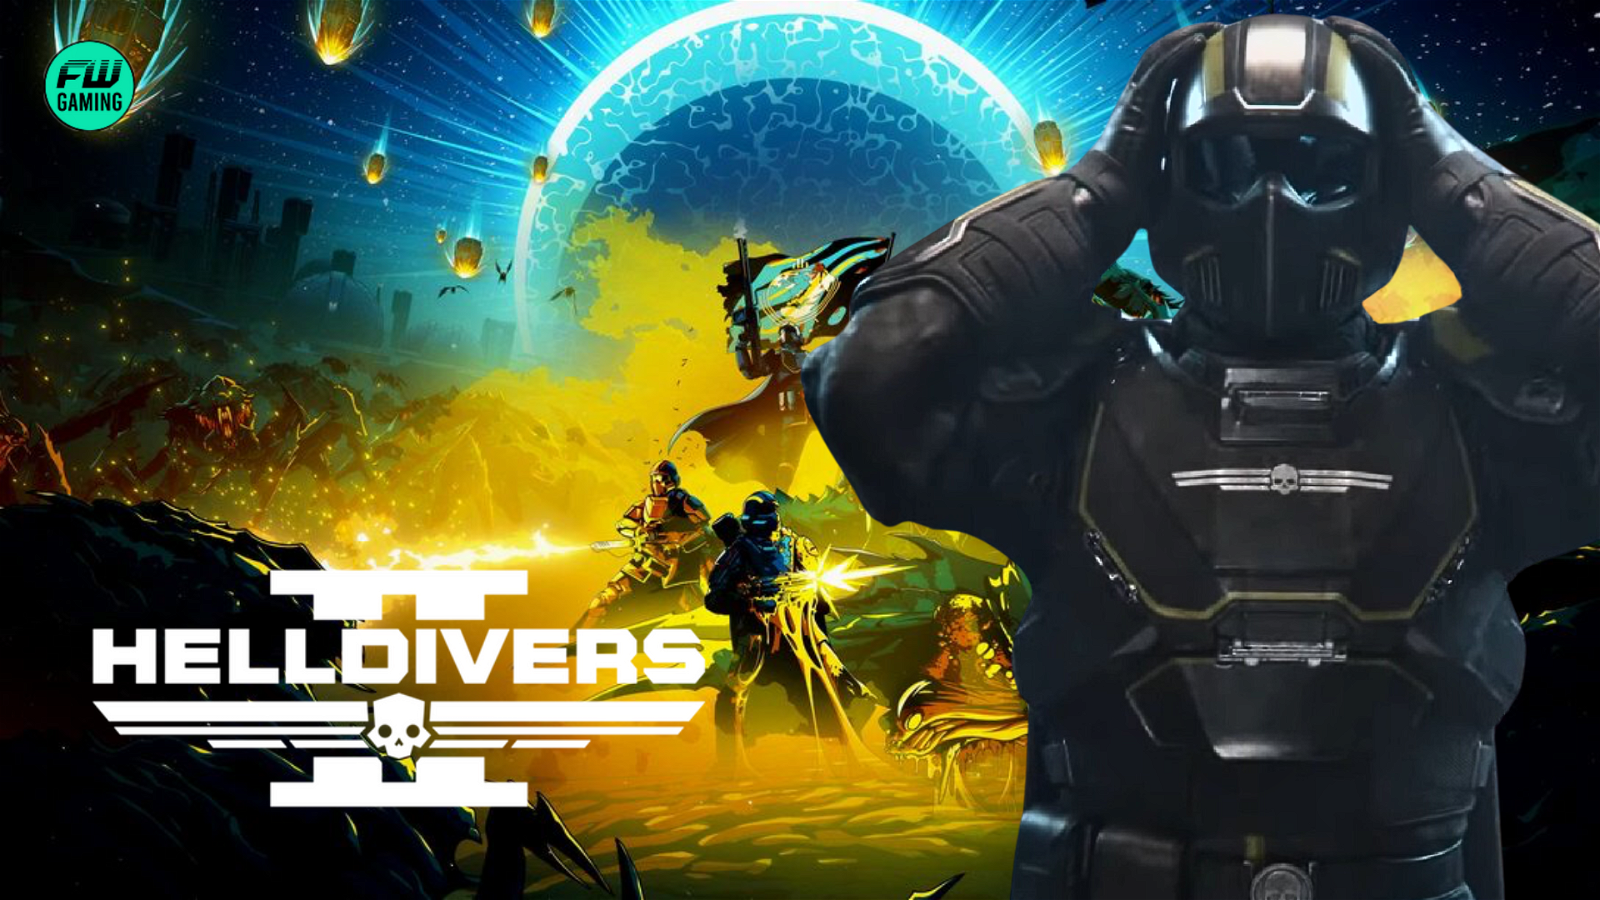 “Please stop…”: A New Enemy Has Raised Its Head in Helldivers 2, and This Time It’s Common Courtesy – Are the PC and PlayStation Communities Turning on One Another?